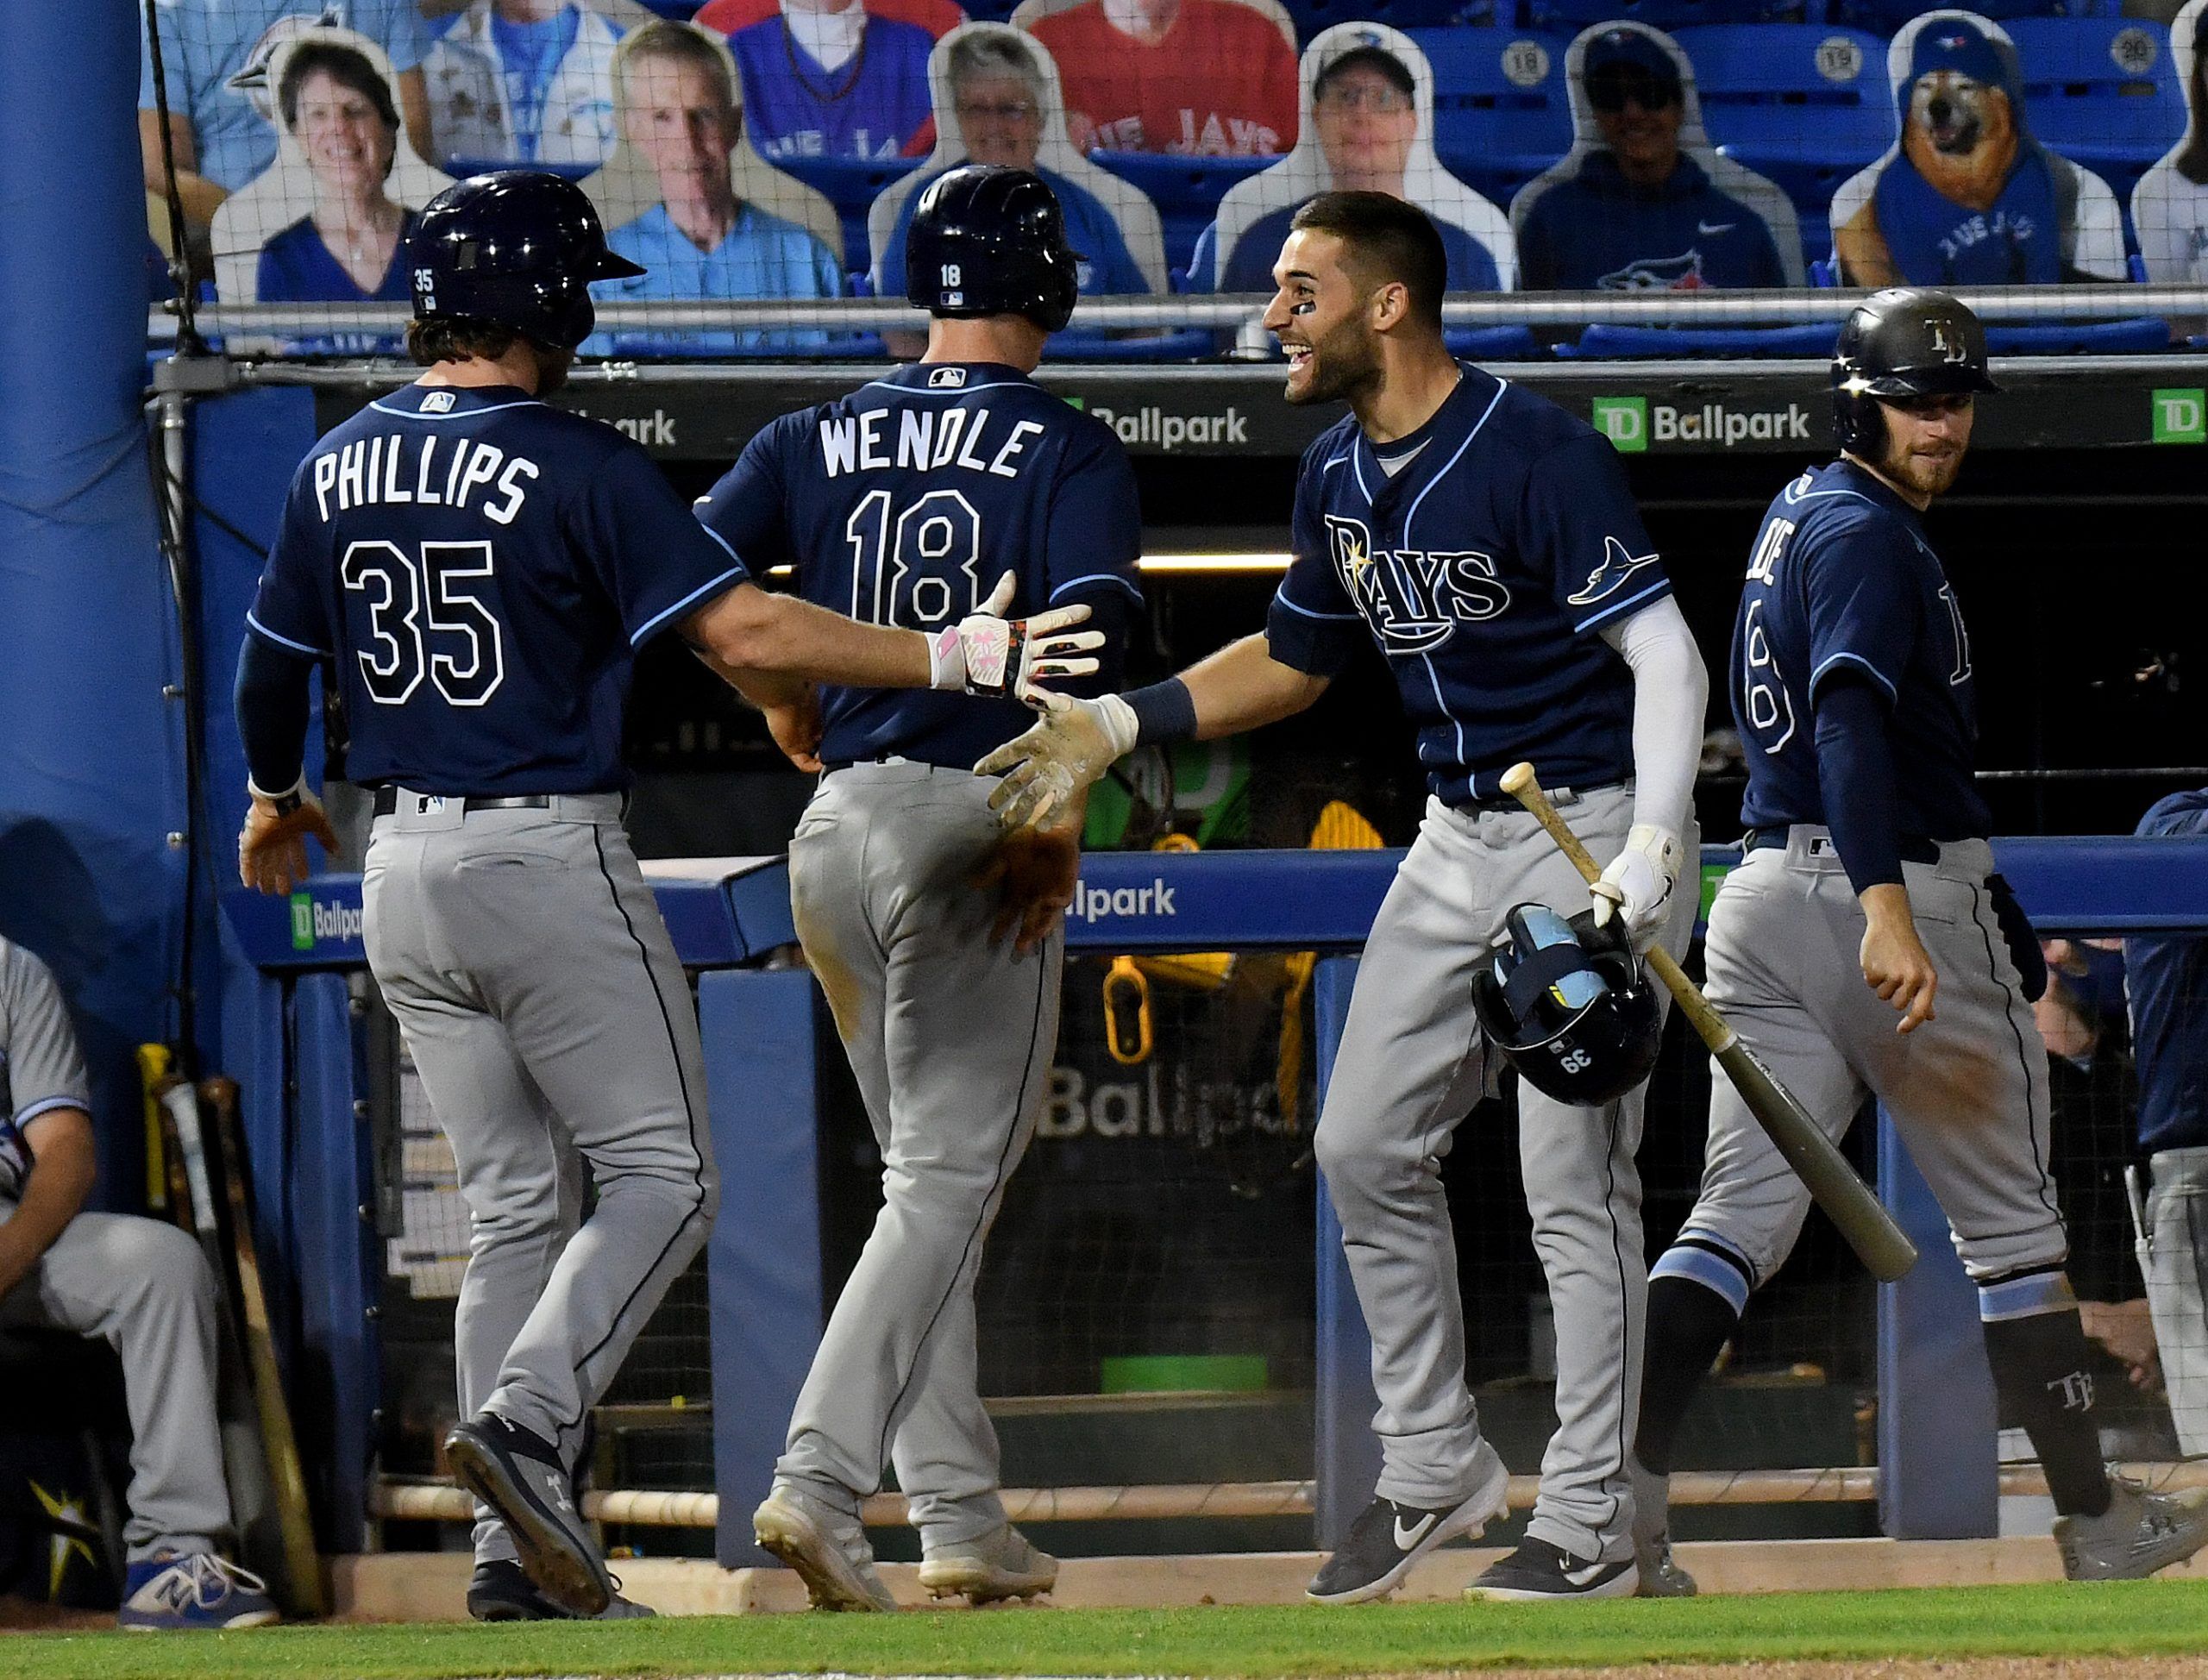 Kiermaier's Clutch Hit Gives Rays First Walk-Off Win of 2020